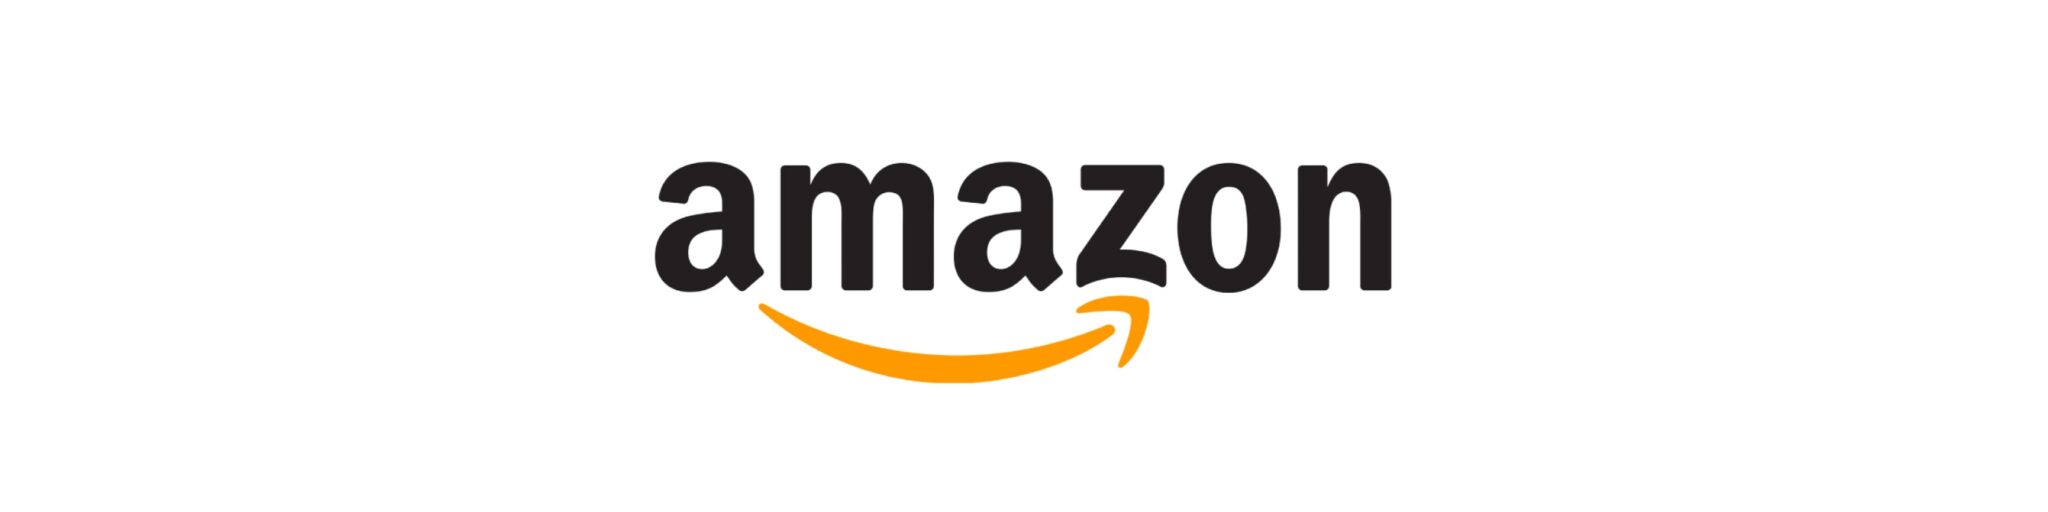 Amazon in the top 8 Big Data solutions